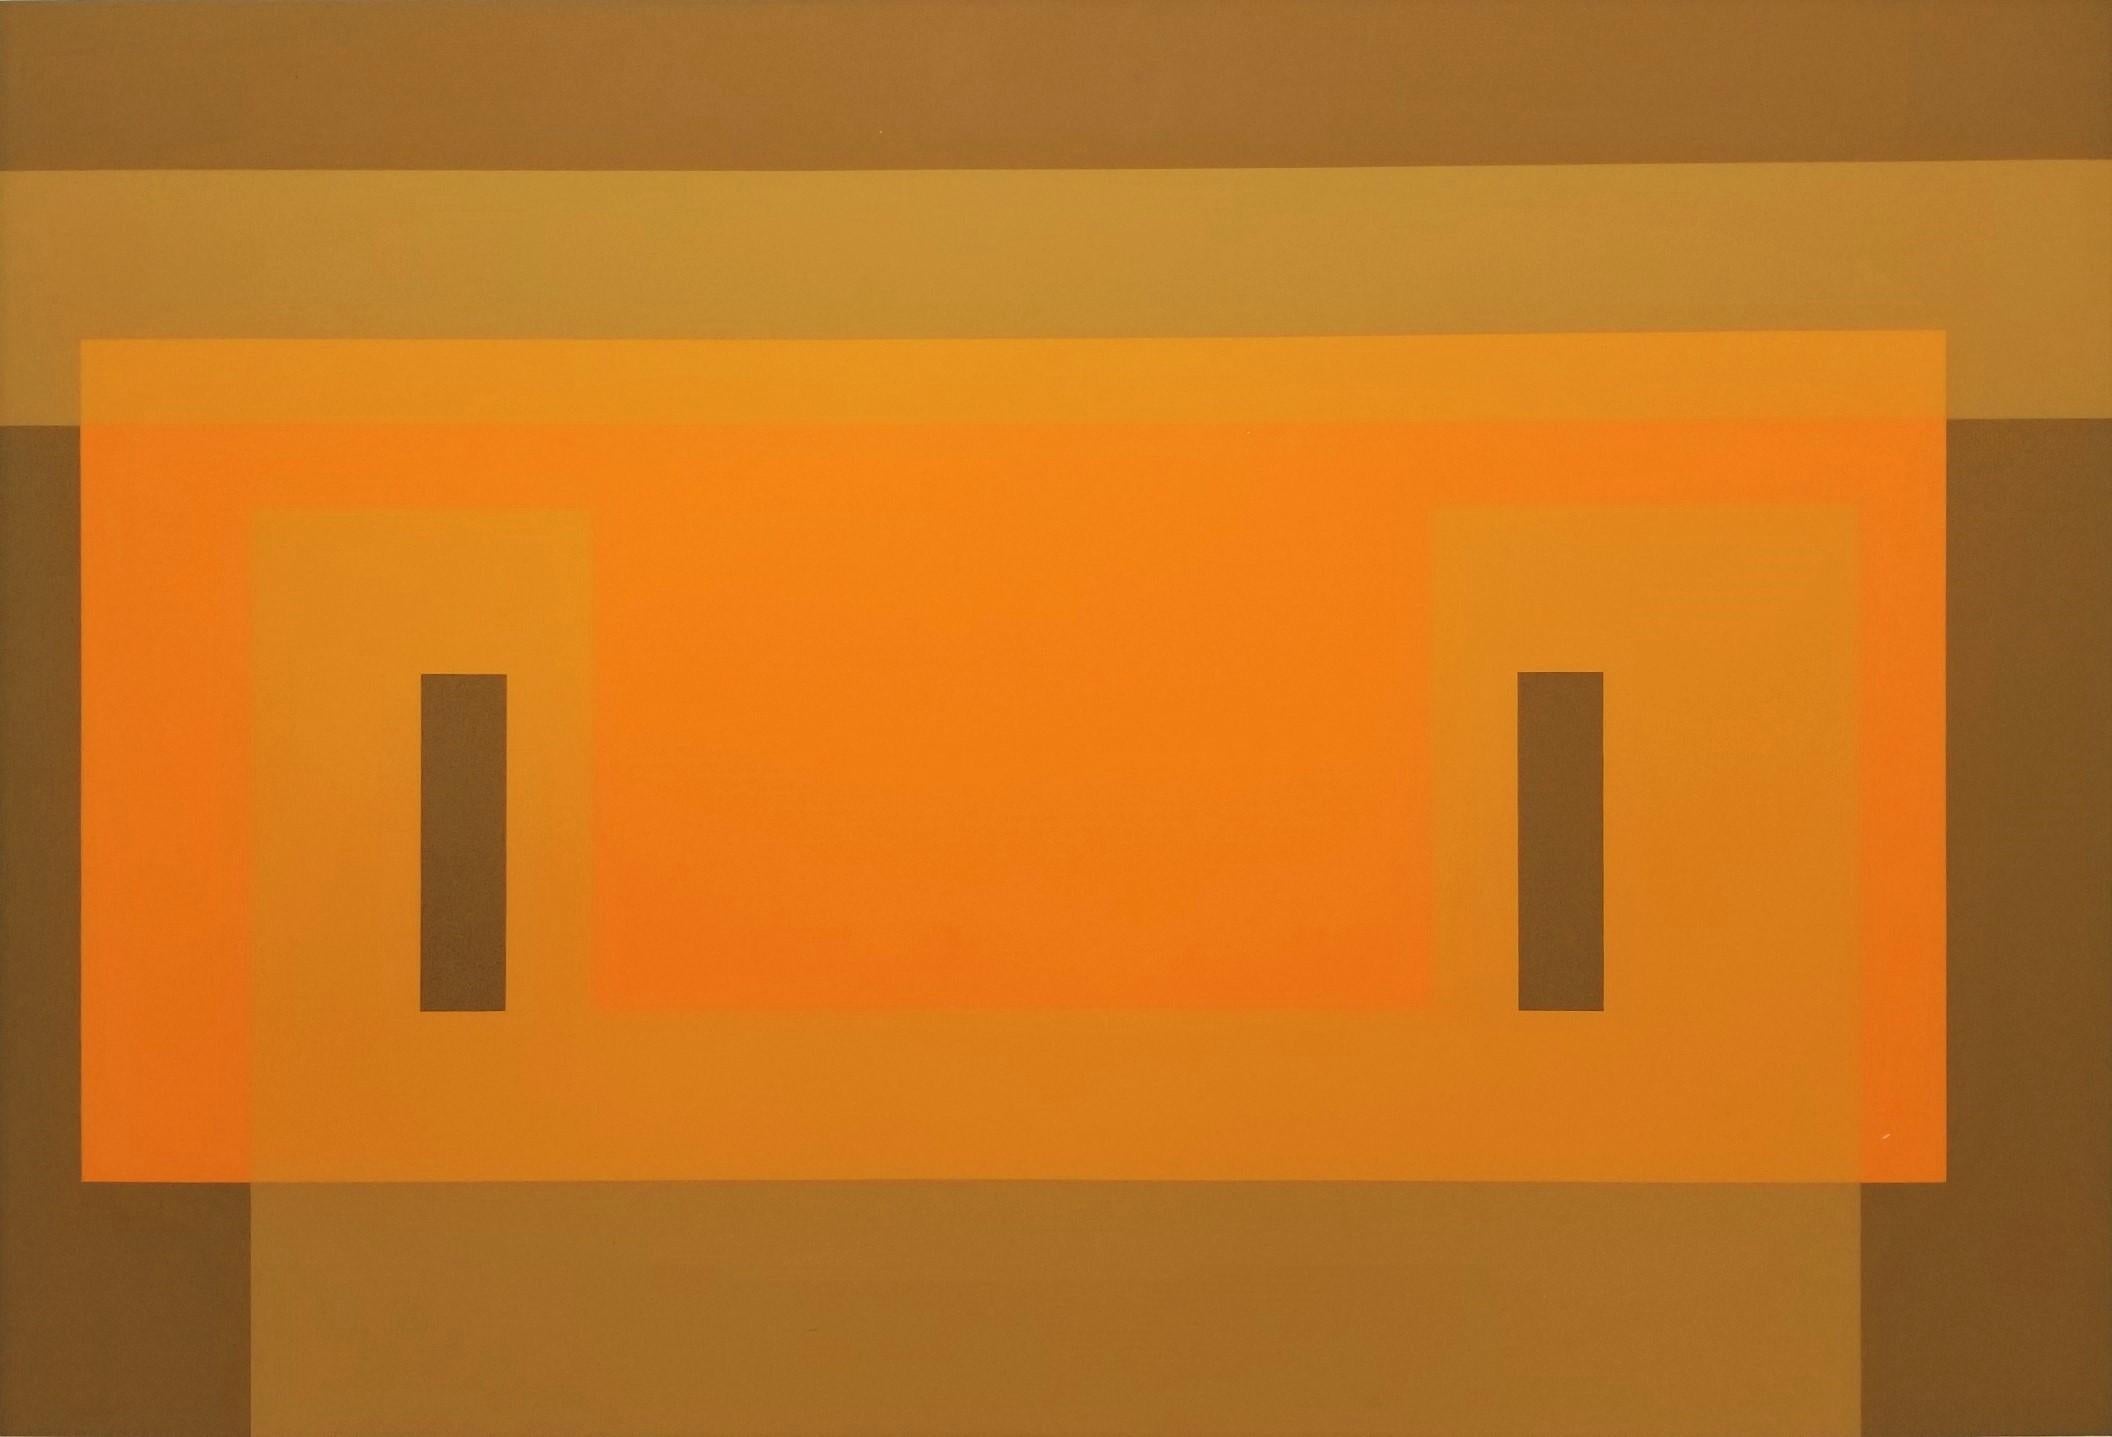 Josef Albers Abstract Print - Red Orange Wall (1959)